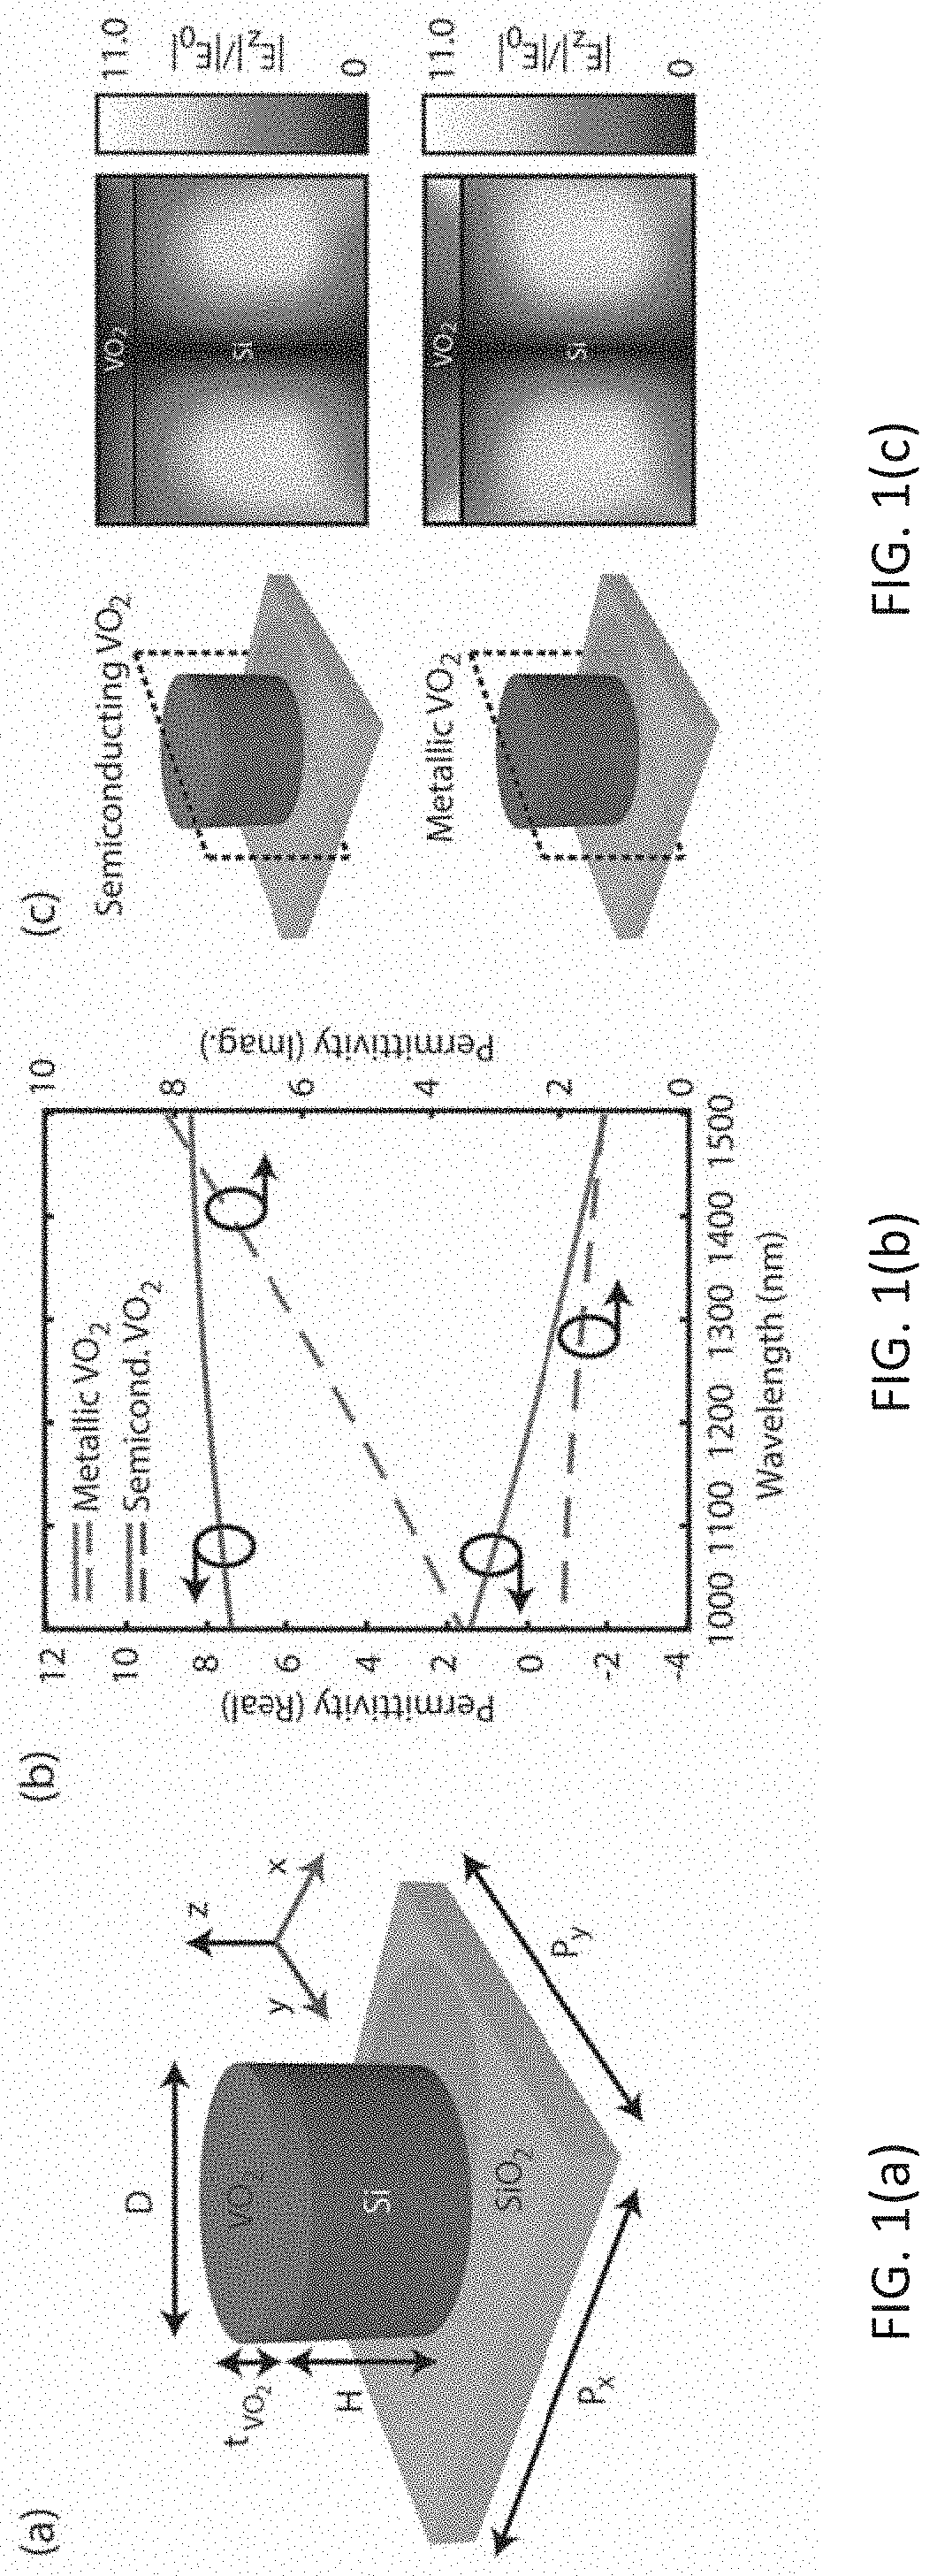 High-efficiency optical limiter using metasurface and phase-change material